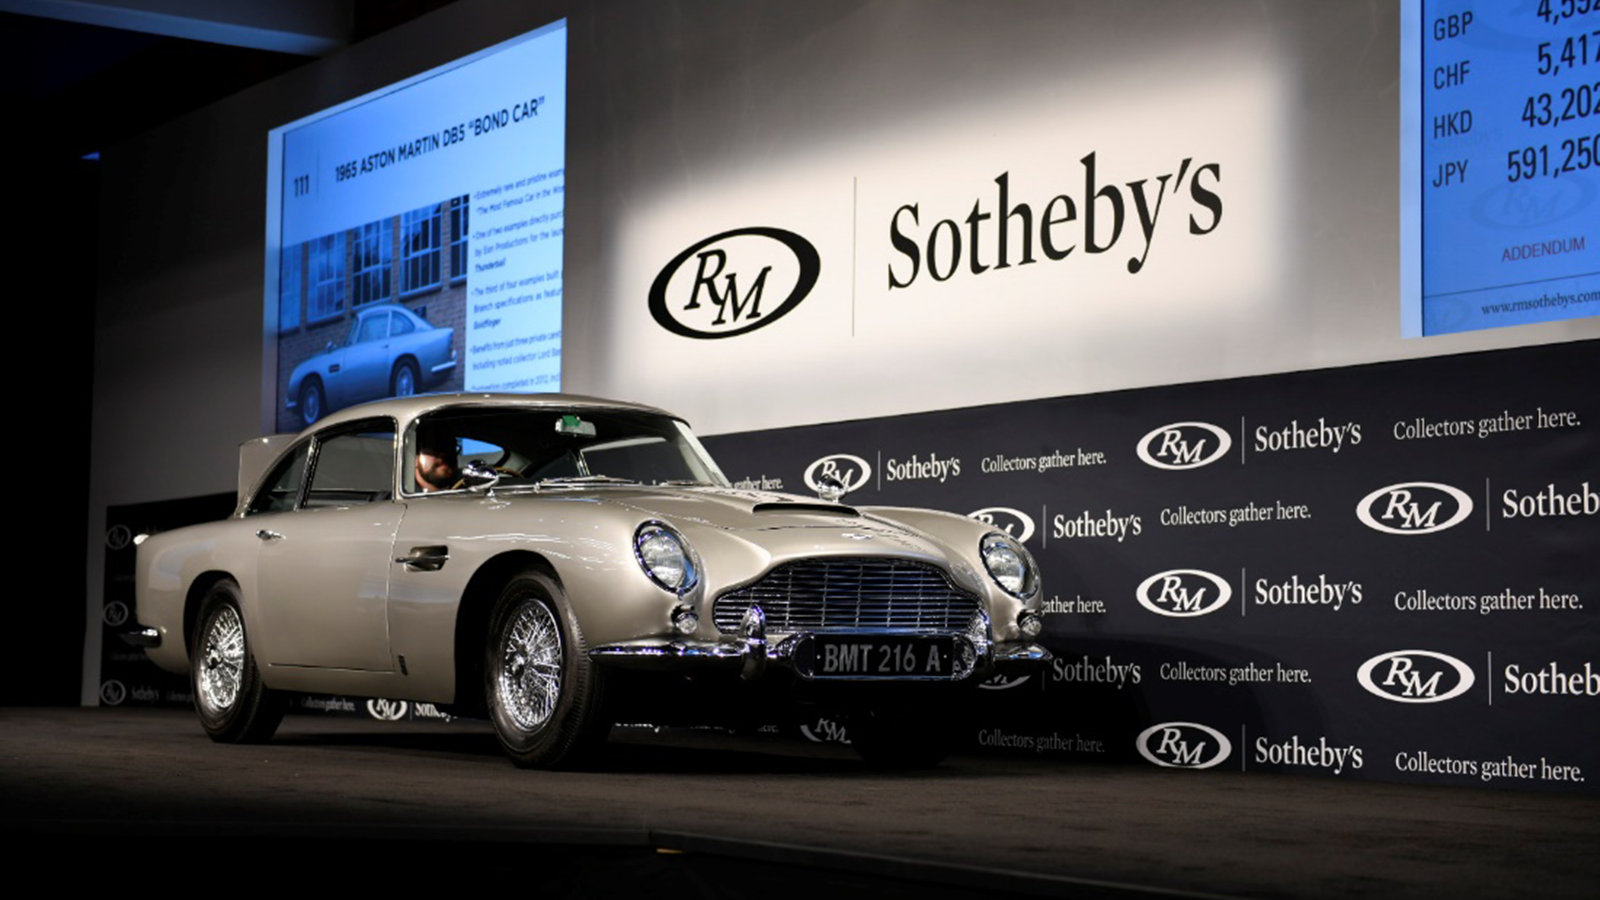 Bond DB5 sells for $6m at auction